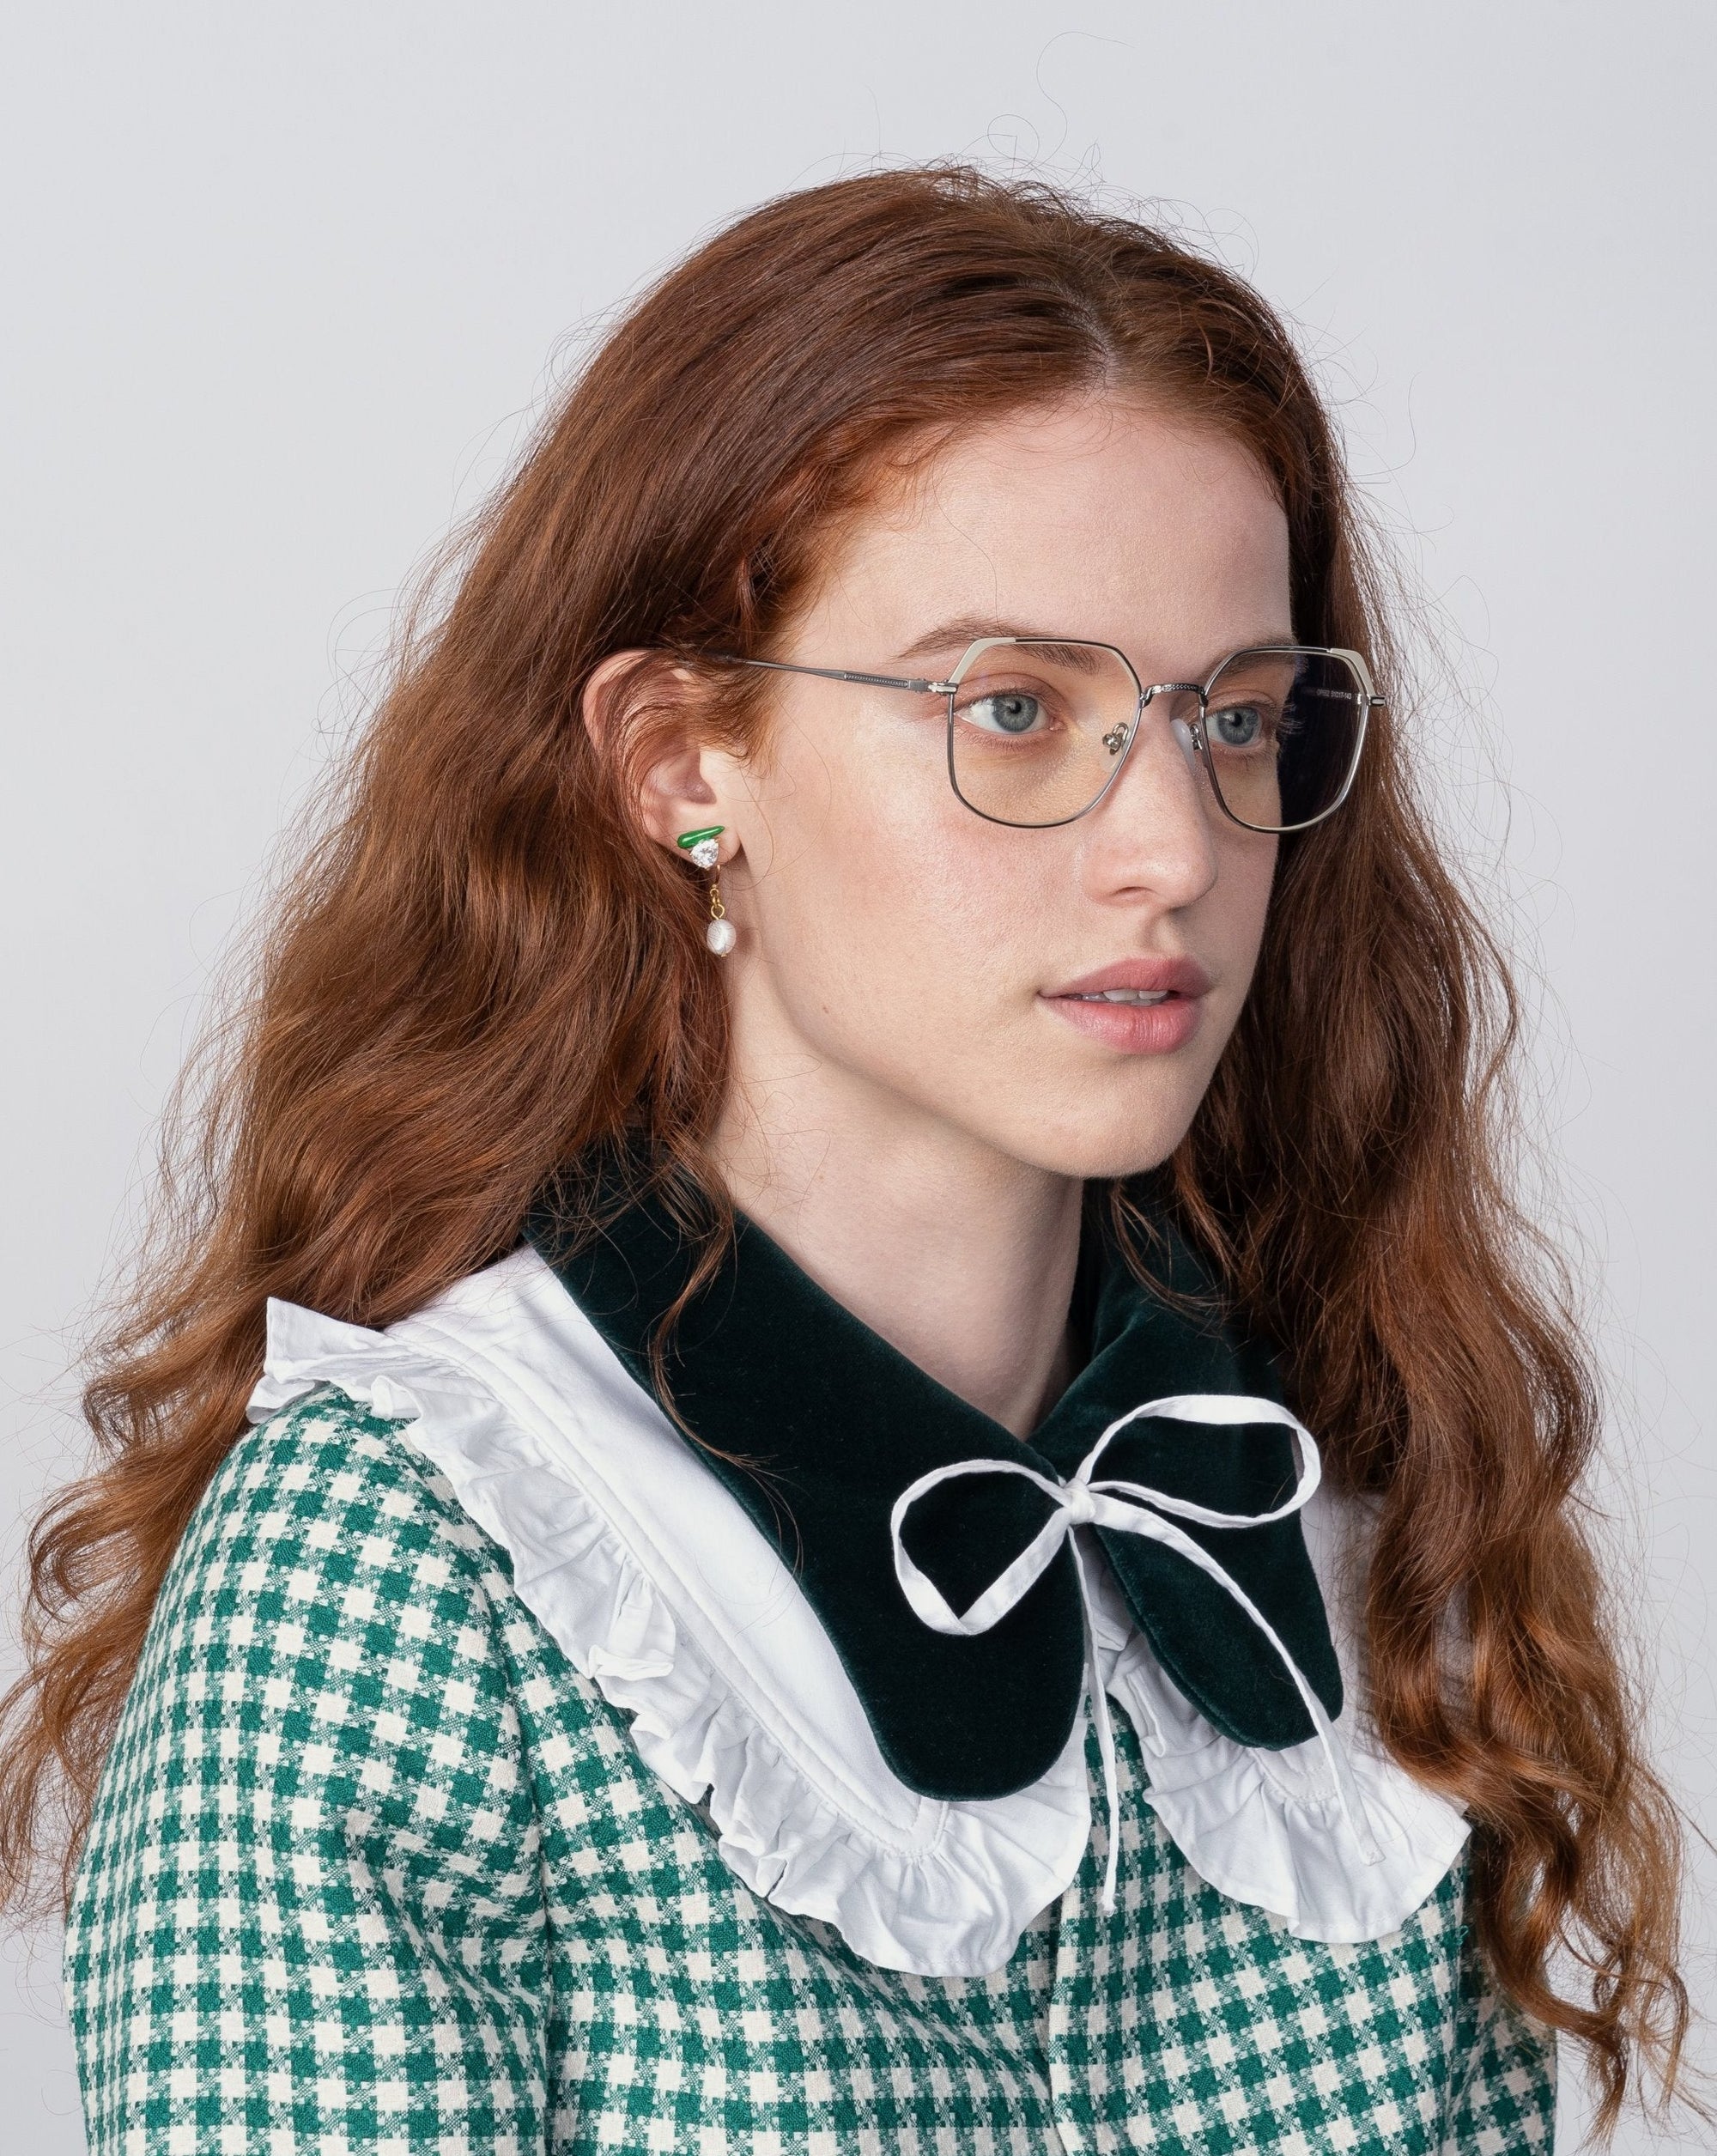 A young woman with long, wavy red hair, wearing glasses with prescription lenses and a green and white checkered dress with a large, white, ruffled collar adorned with a black bow. She has green gemstone earrings and is looking slightly off to the side against a plain, light background while wearing For Art&#39;s Sake® Godiva eyeglasses.